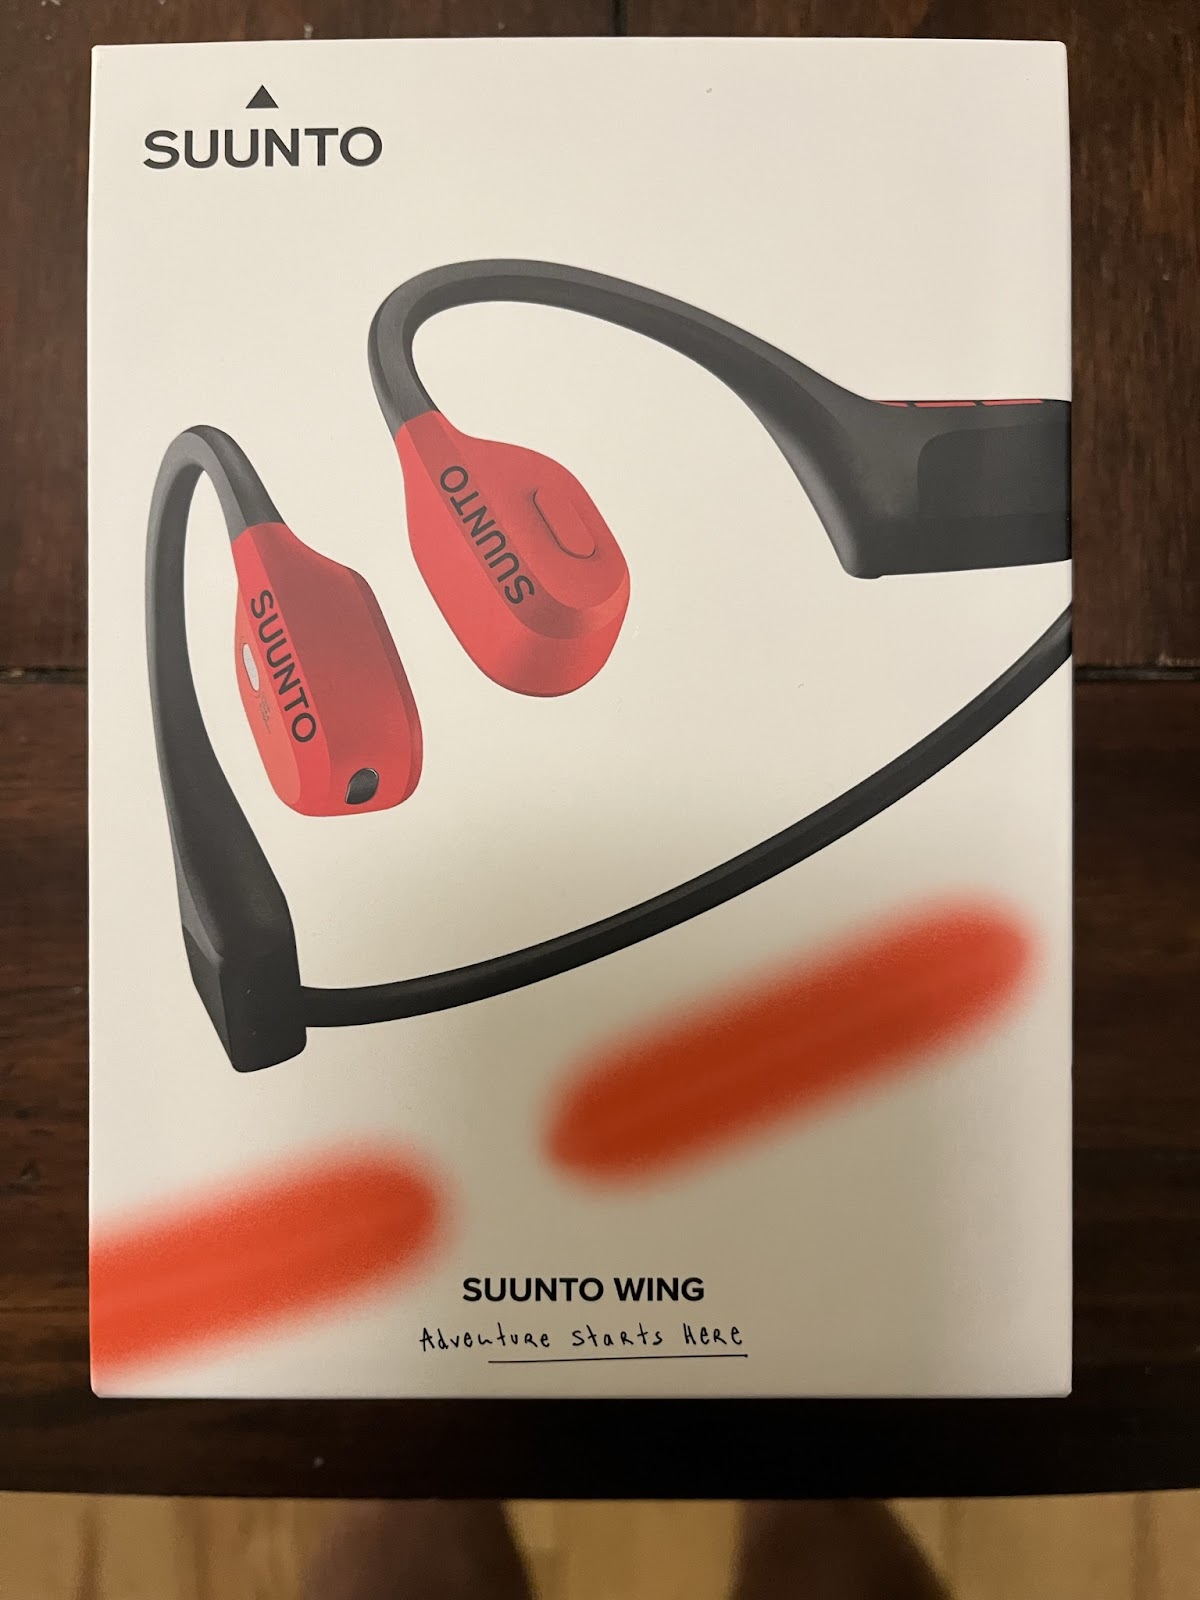 Suunto Wing - Getting started